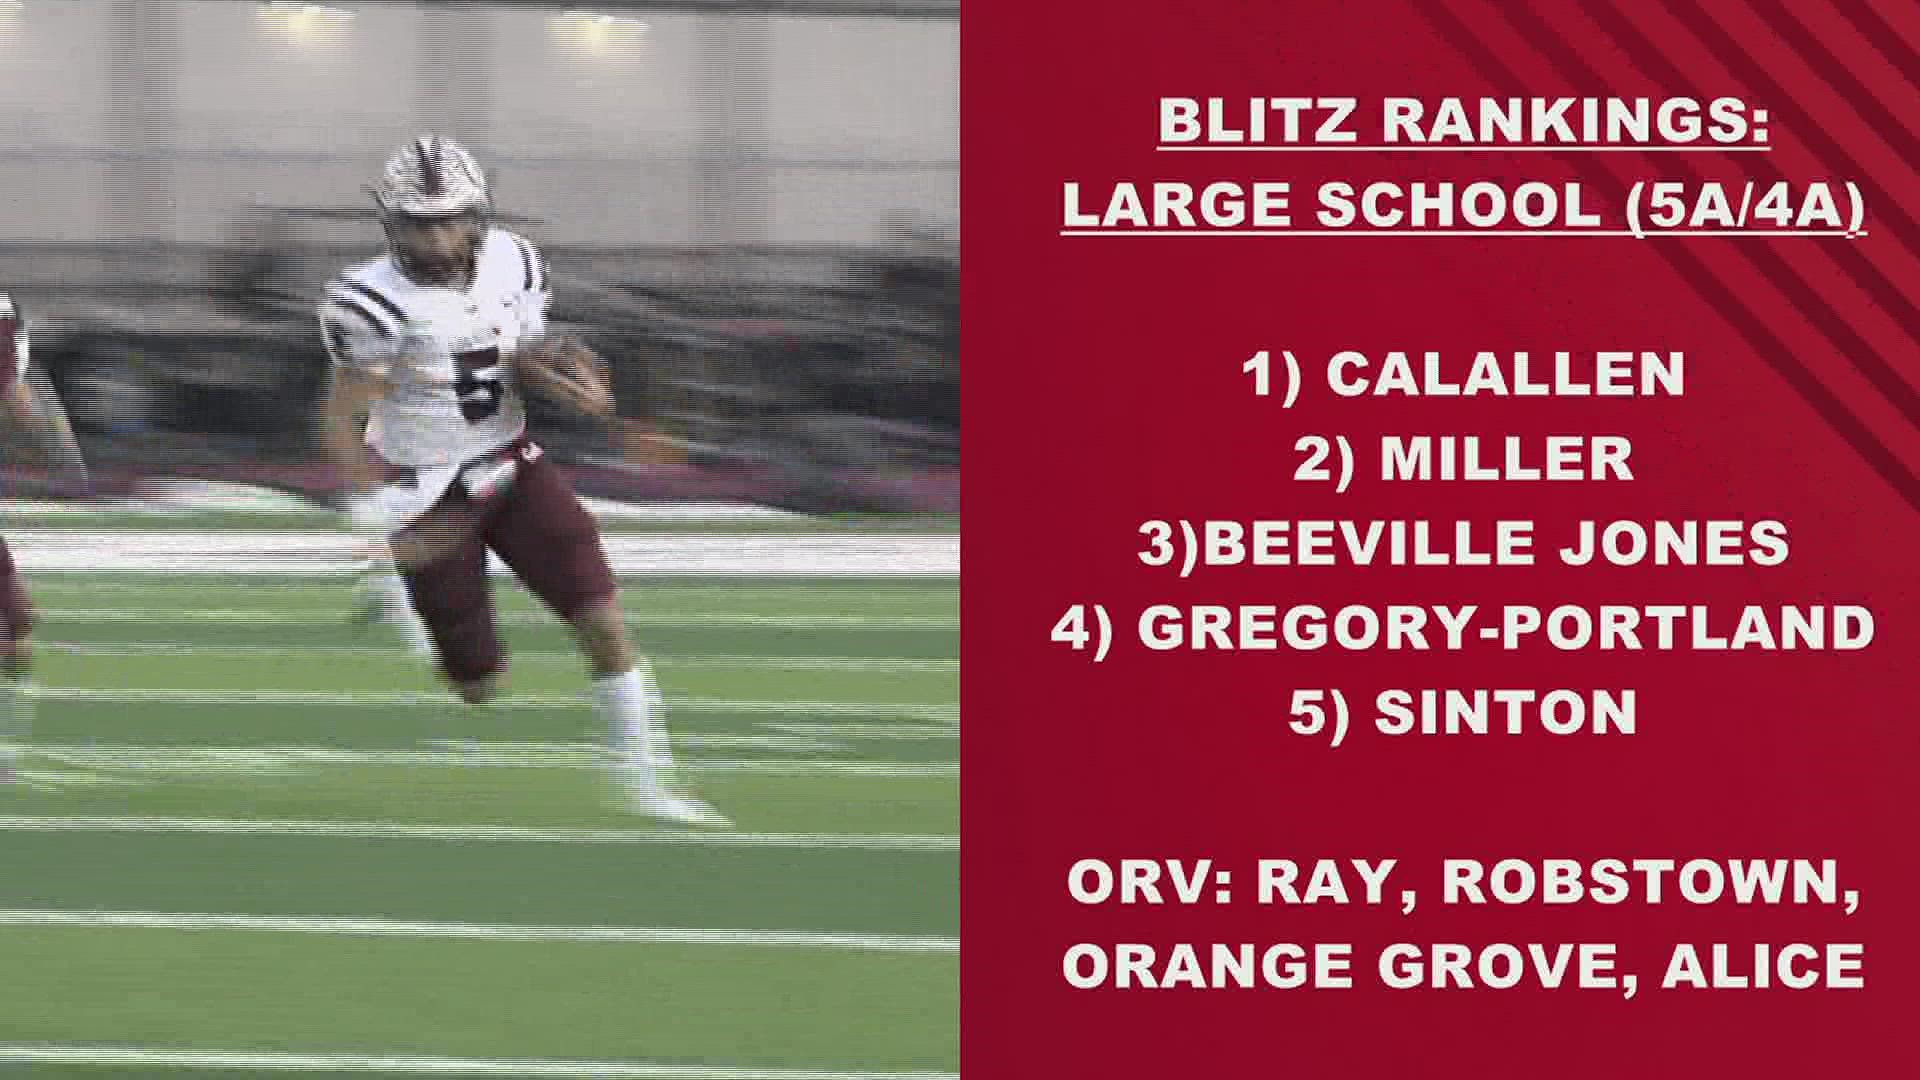 There were several changes in both the large and small school rankings after last week's games.